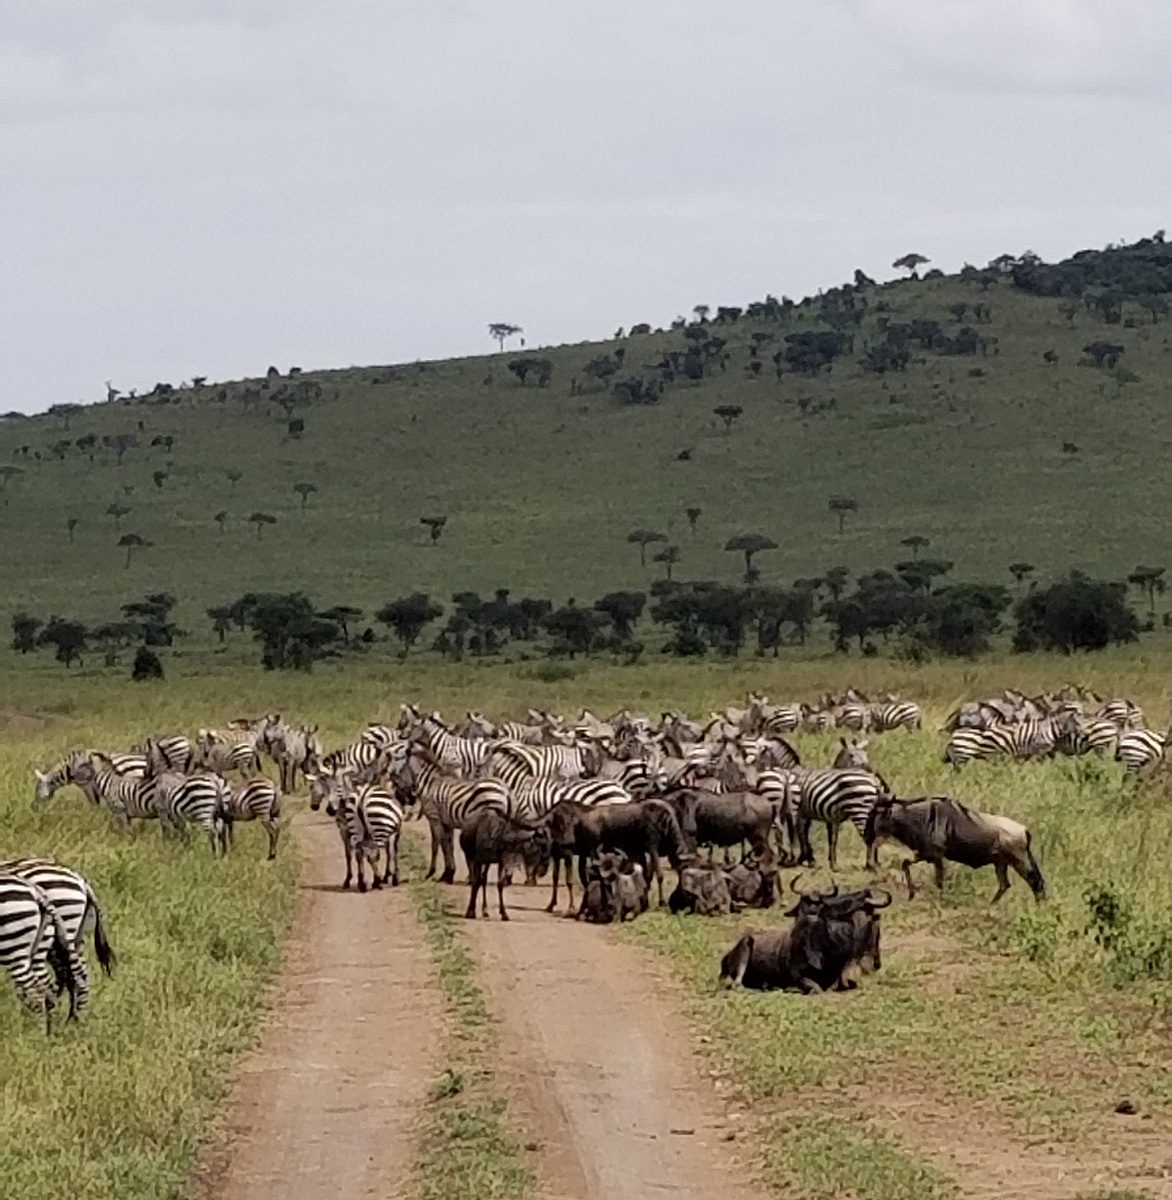 zebras and wildebeests in road in tanzania